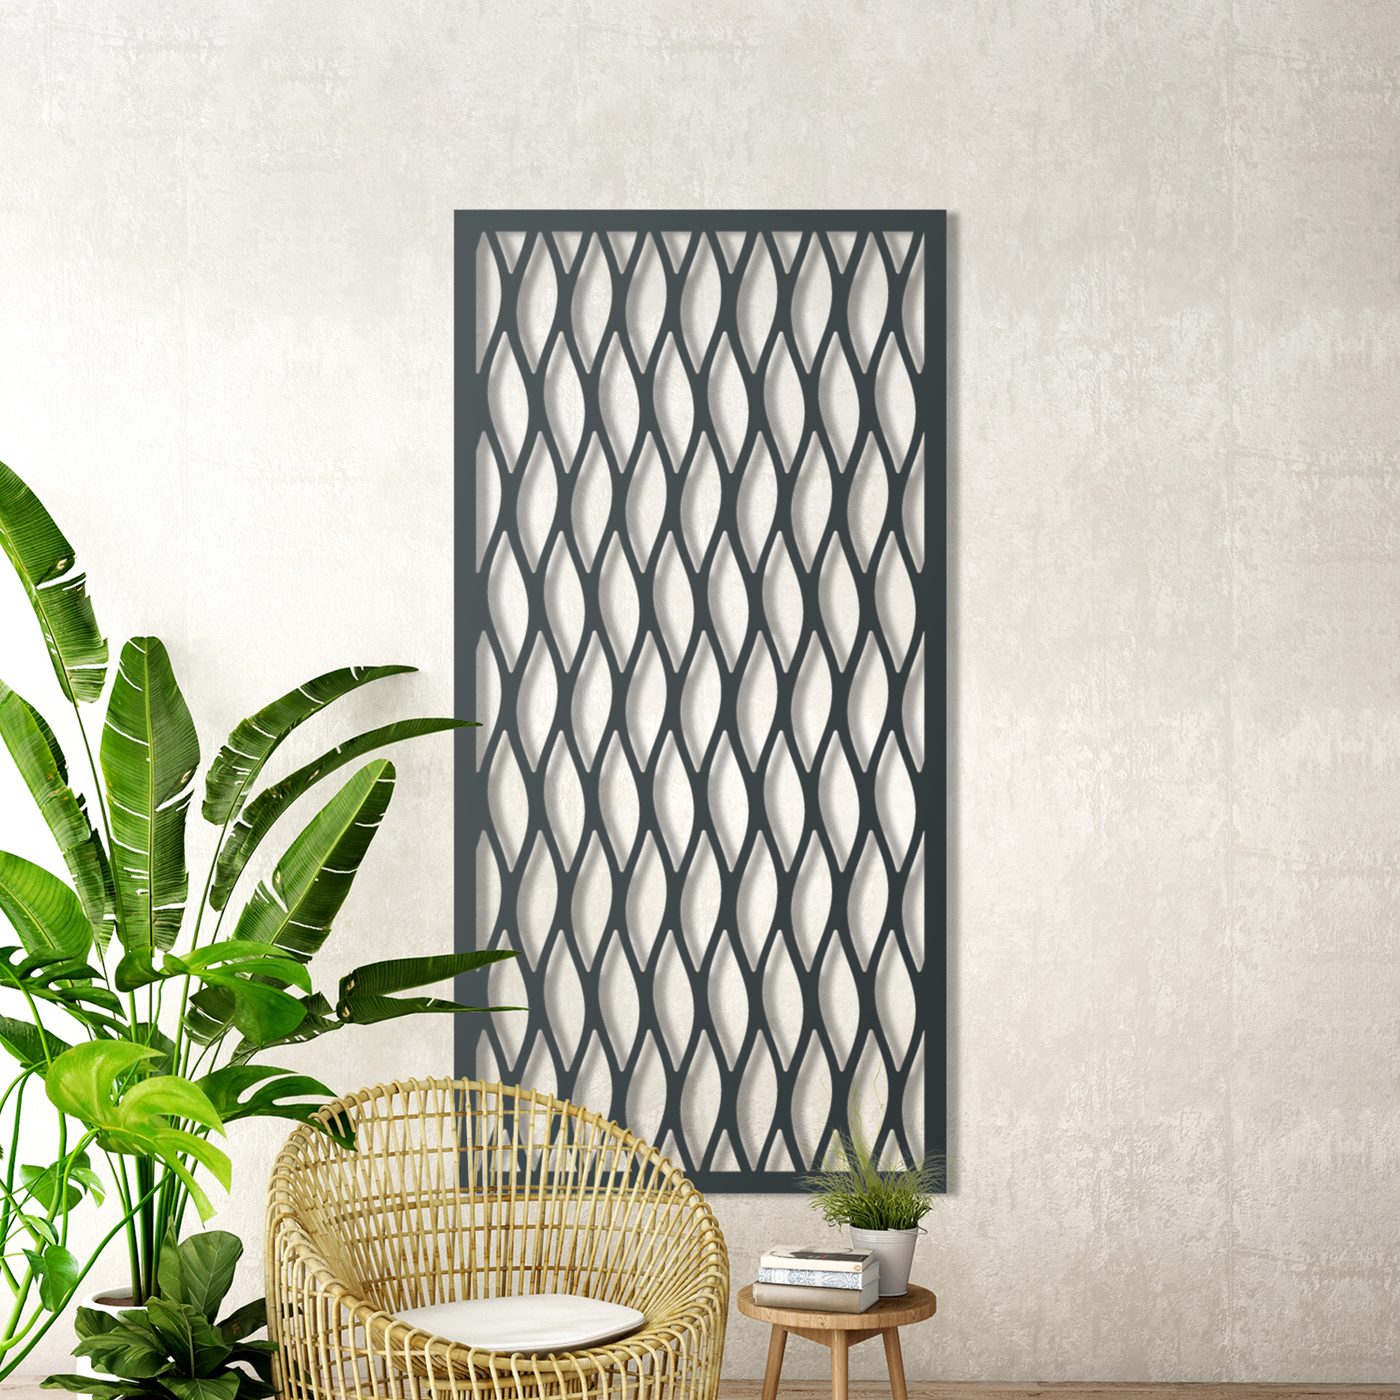 Chainlink Metal Screen: The Perfect Way to Keep Your Garden Private and Stylish